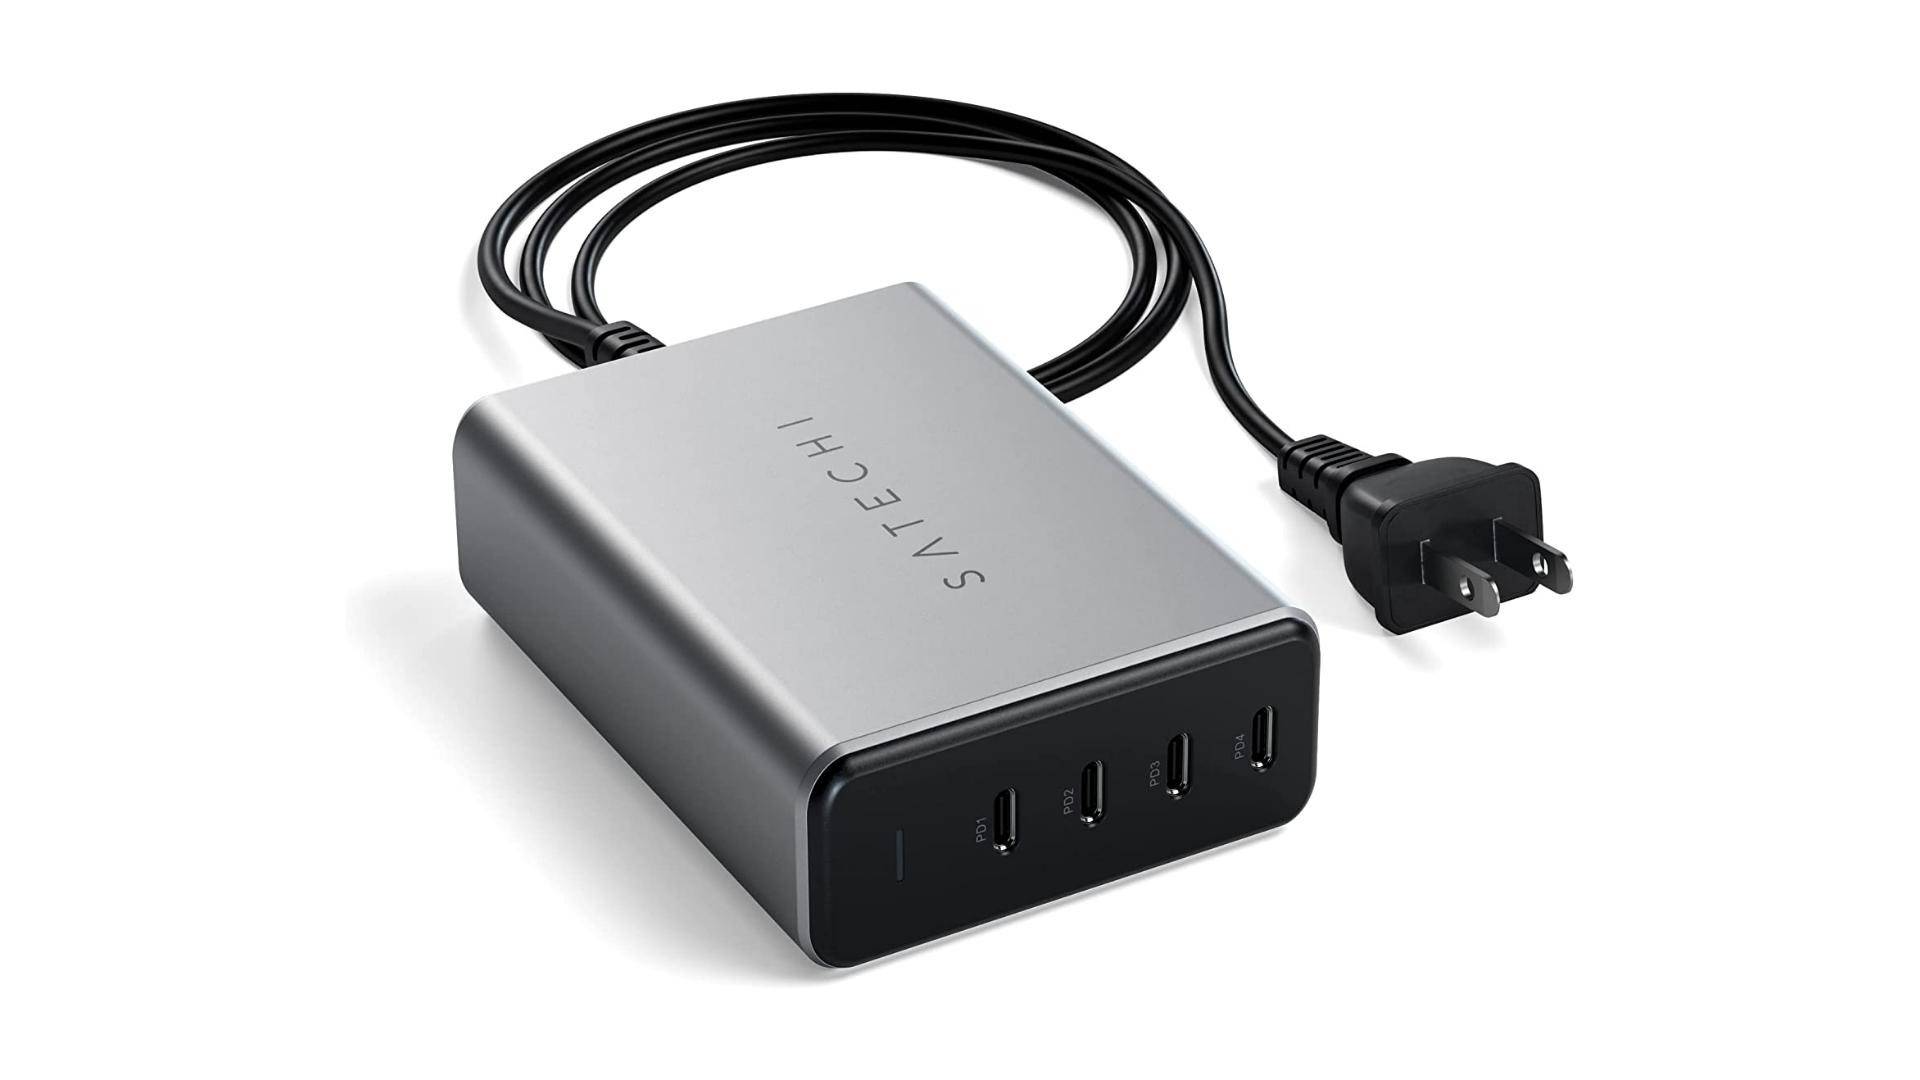 Satechi 165W USB C Power Adapter with its detachable power cable attached